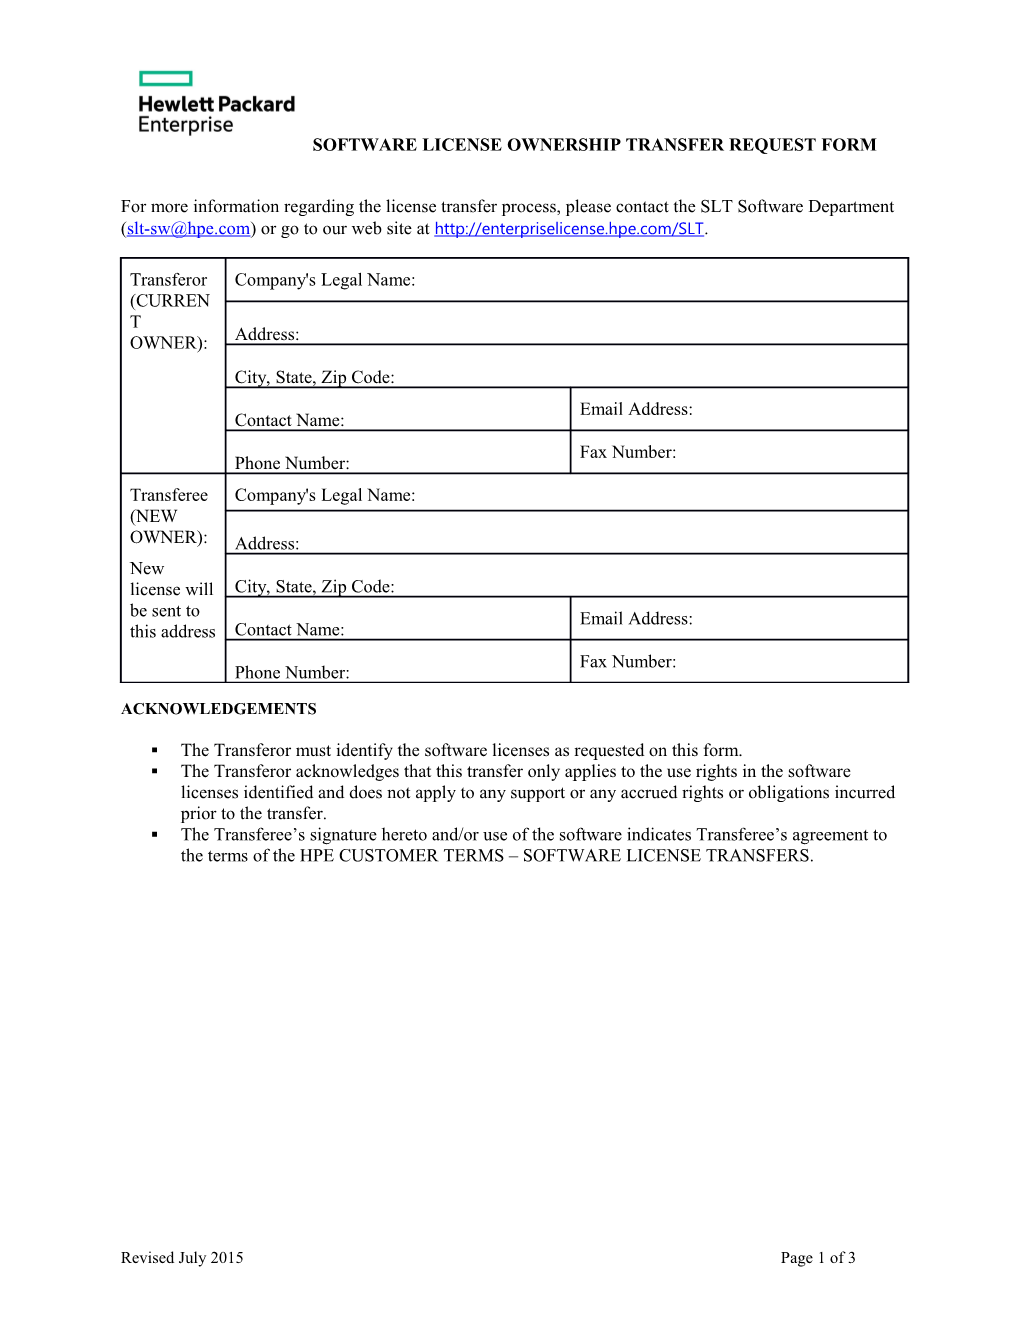 Software License Ownership Transfer Request Form